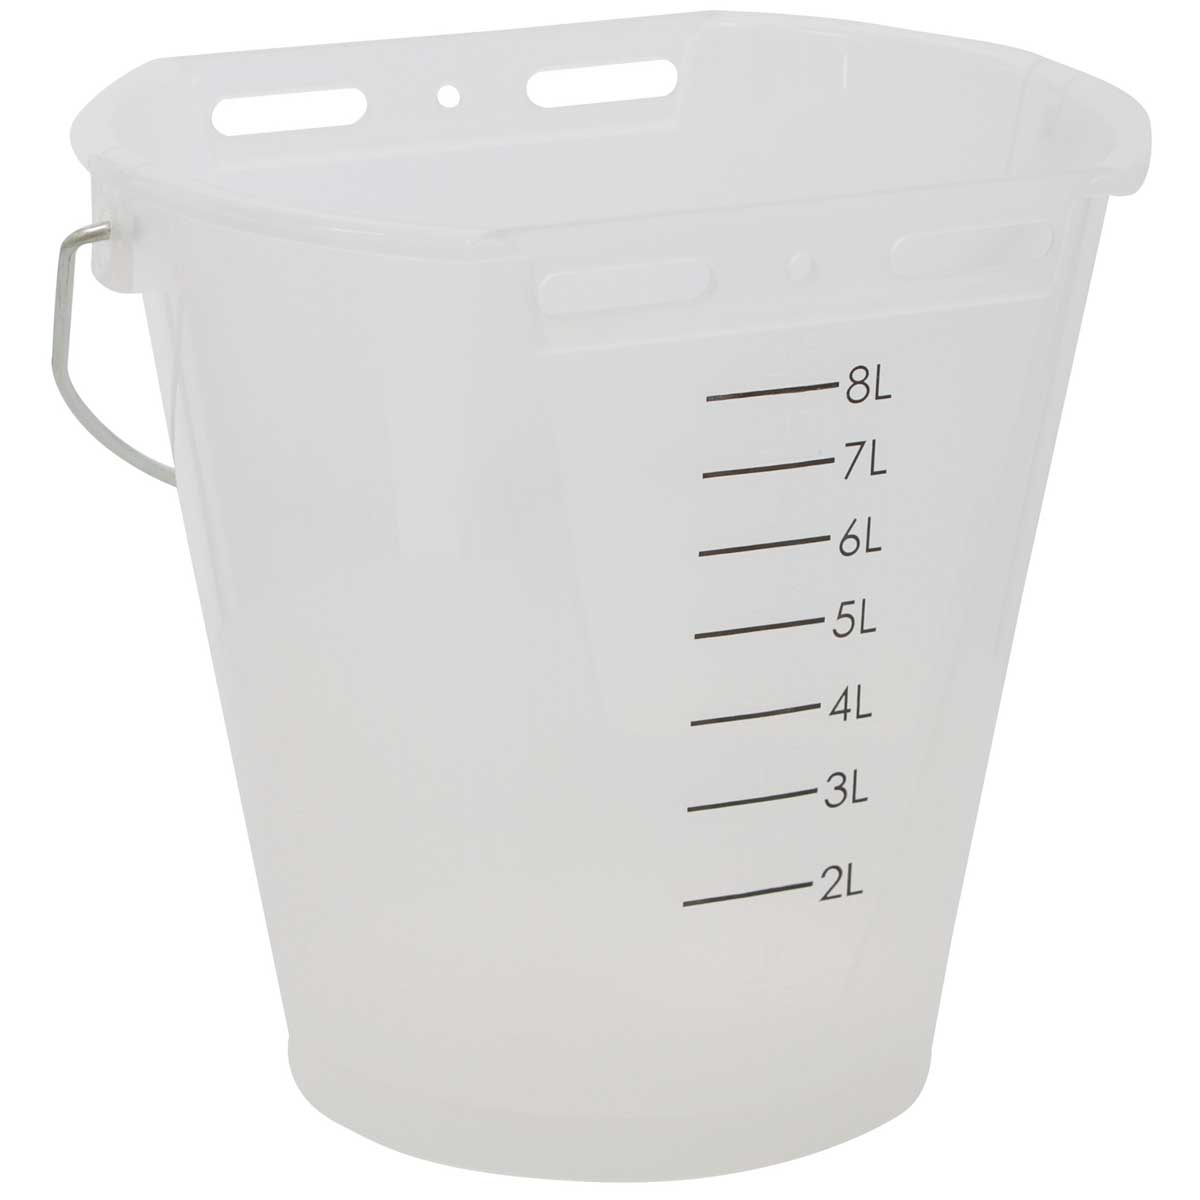 Feeding Bucket transparent with scale white